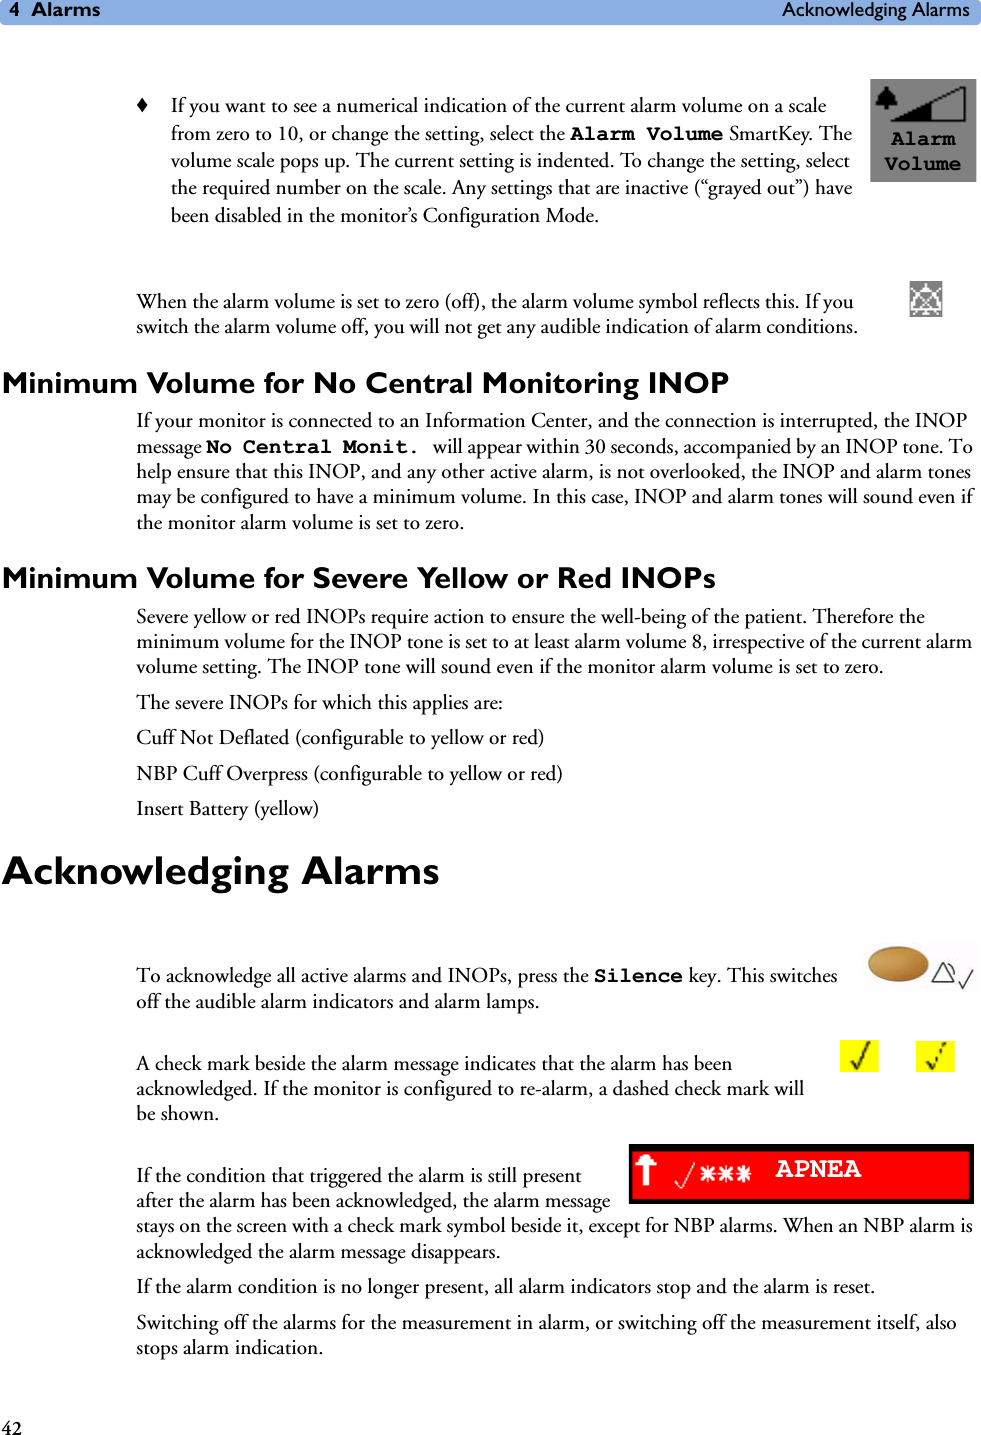 4Alarms Acknowledging Alarms42♦If you want to see a numerical indication of the current alarm volume on a scale from zero to 10, or change the setting, select the Alarm Volume SmartKey. The volume scale pops up. The current setting is indented. To change the setting, select the required number on the scale. Any settings that are inactive (“grayed out”) have been disabled in the monitor’s Configuration Mode.When the alarm volume is set to zero (off), the alarm volume symbol reflects this. If you switch the alarm volume off, you will not get any audible indication of alarm conditions.Minimum Volume for No Central Monitoring INOPIf your monitor is connected to an Information Center, and the connection is interrupted, the INOP message No Central Monit. will appear within 30 seconds, accompanied by an INOP tone. To help ensure that this INOP, and any other active alarm, is not overlooked, the INOP and alarm tones may be configured to have a minimum volume. In this case, INOP and alarm tones will sound even if the monitor alarm volume is set to zero.Minimum Volume for Severe Yellow or Red INOPsSevere yellow or red INOPs require action to ensure the well-being of the patient. Therefore the minimum volume for the INOP tone is set to at least alarm volume 8, irrespective of the current alarm volume setting. The INOP tone will sound even if the monitor alarm volume is set to zero.The severe INOPs for which this applies are:Cuff Not Deflated (configurable to yellow or red)NBP Cuff Overpress (configurable to yellow or red)Insert Battery (yellow)Acknowledging Alarms To acknowledge all active alarms and INOPs, press the Silence key. This switches off the audible alarm indicators and alarm lamps. A check mark beside the alarm message indicates that the alarm has been acknowledged. If the monitor is configured to re-alarm, a dashed check mark will be shown.If the condition that triggered the alarm is still present after the alarm has been acknowledged, the alarm message stays on the screen with a check mark symbol beside it, except for NBP alarms. When an NBP alarm is acknowledged the alarm message disappears.If the alarm condition is no longer present, all alarm indicators stop and the alarm is reset.Switching off the alarms for the measurement in alarm, or switching off the measurement itself, also stops alarm indication.Alarm VolumeAPNEA